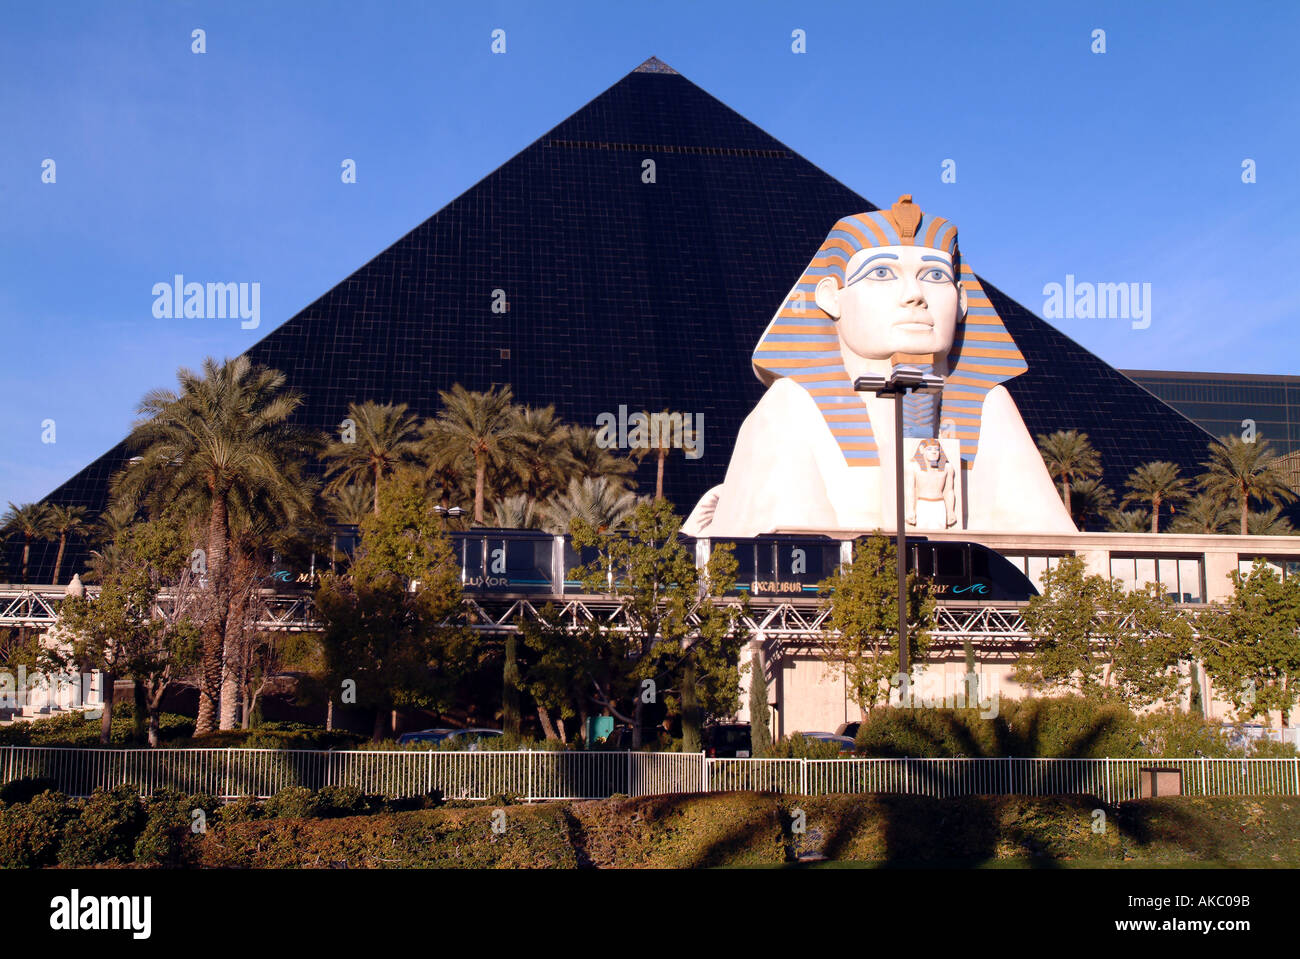 Monorail arrives at the Luxor Hotel Las Vegas Nevada Stock Photo